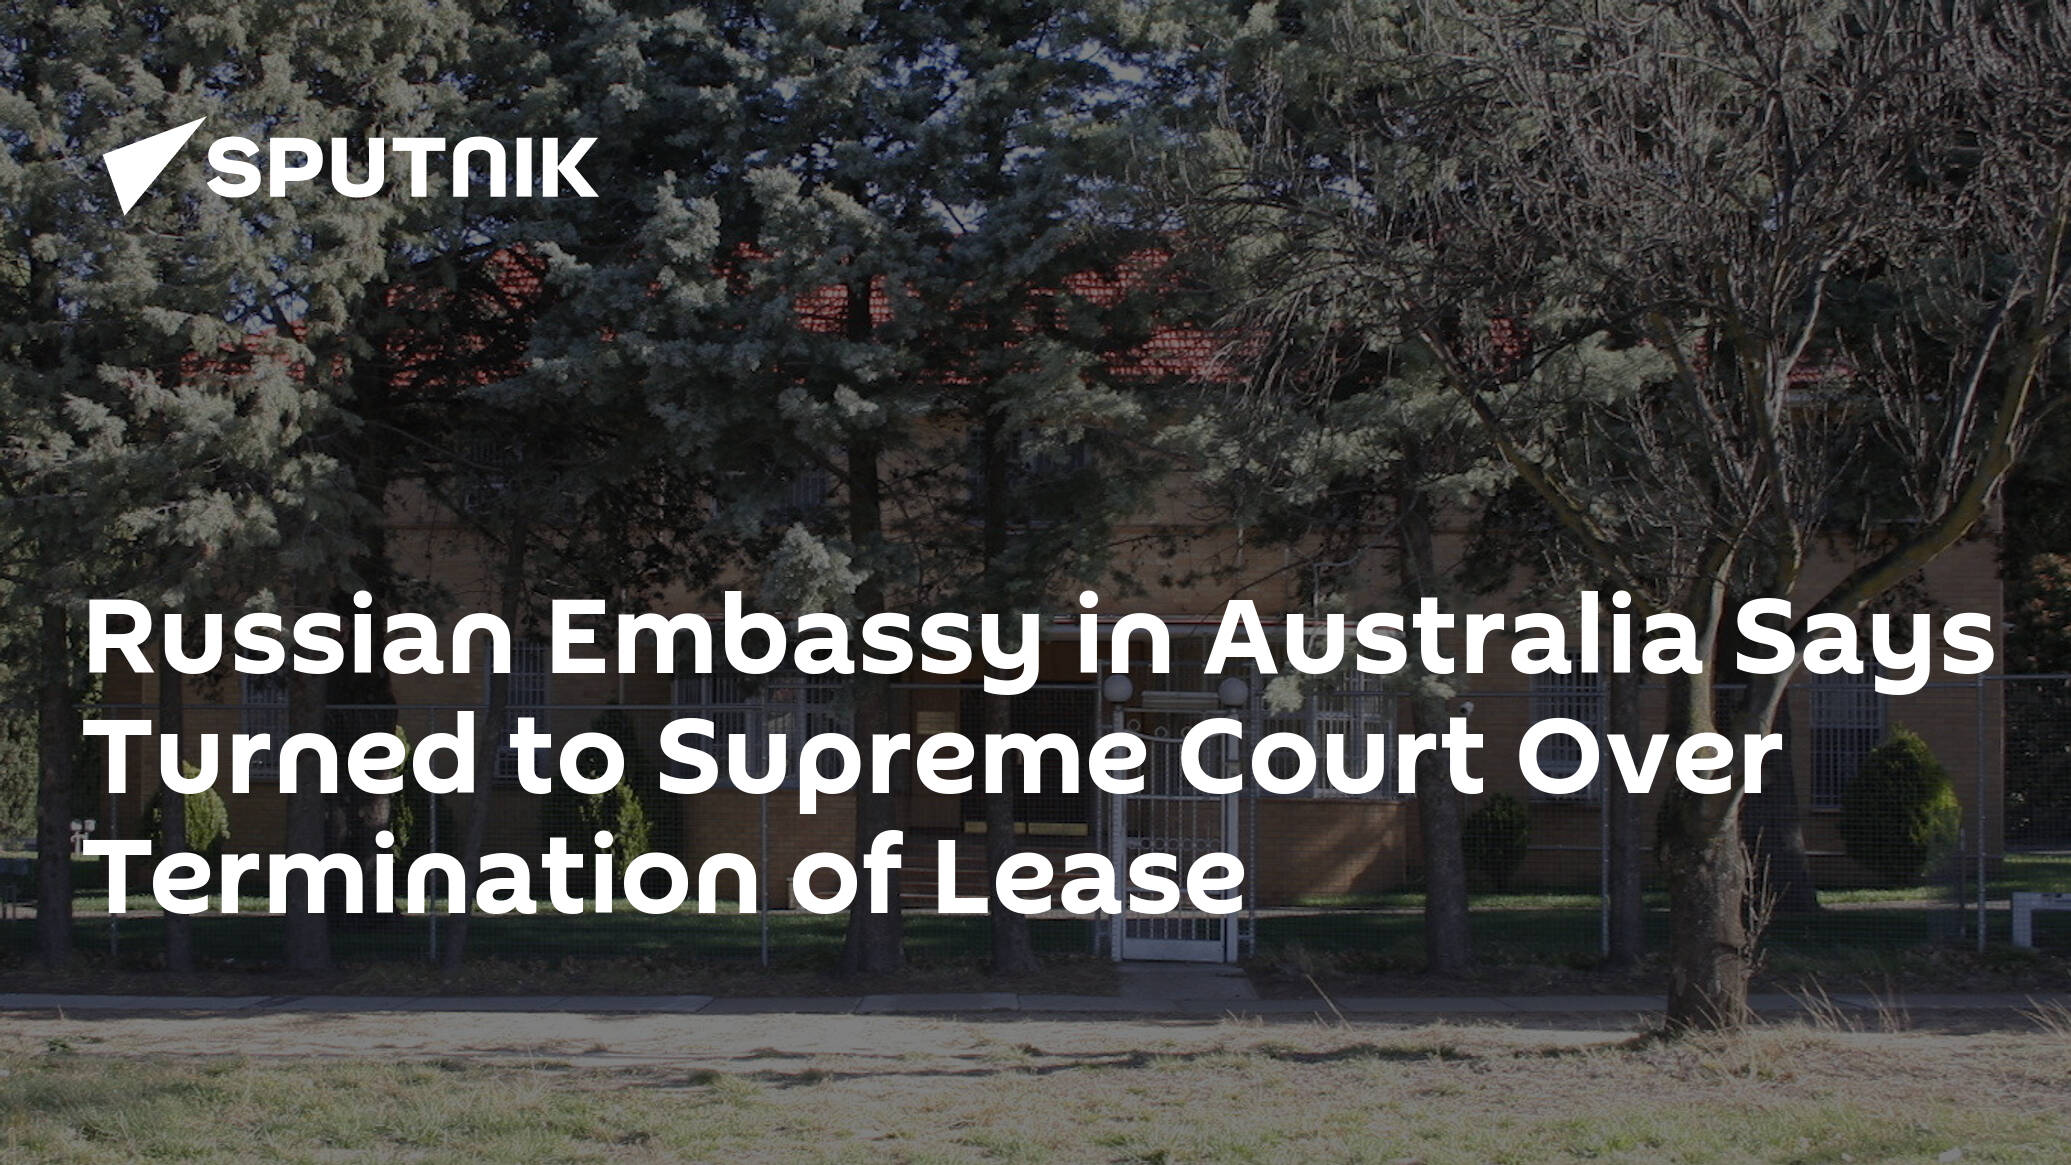 Russian Embassy in Australia Says Turned to Supreme Court Over Termination of Lease